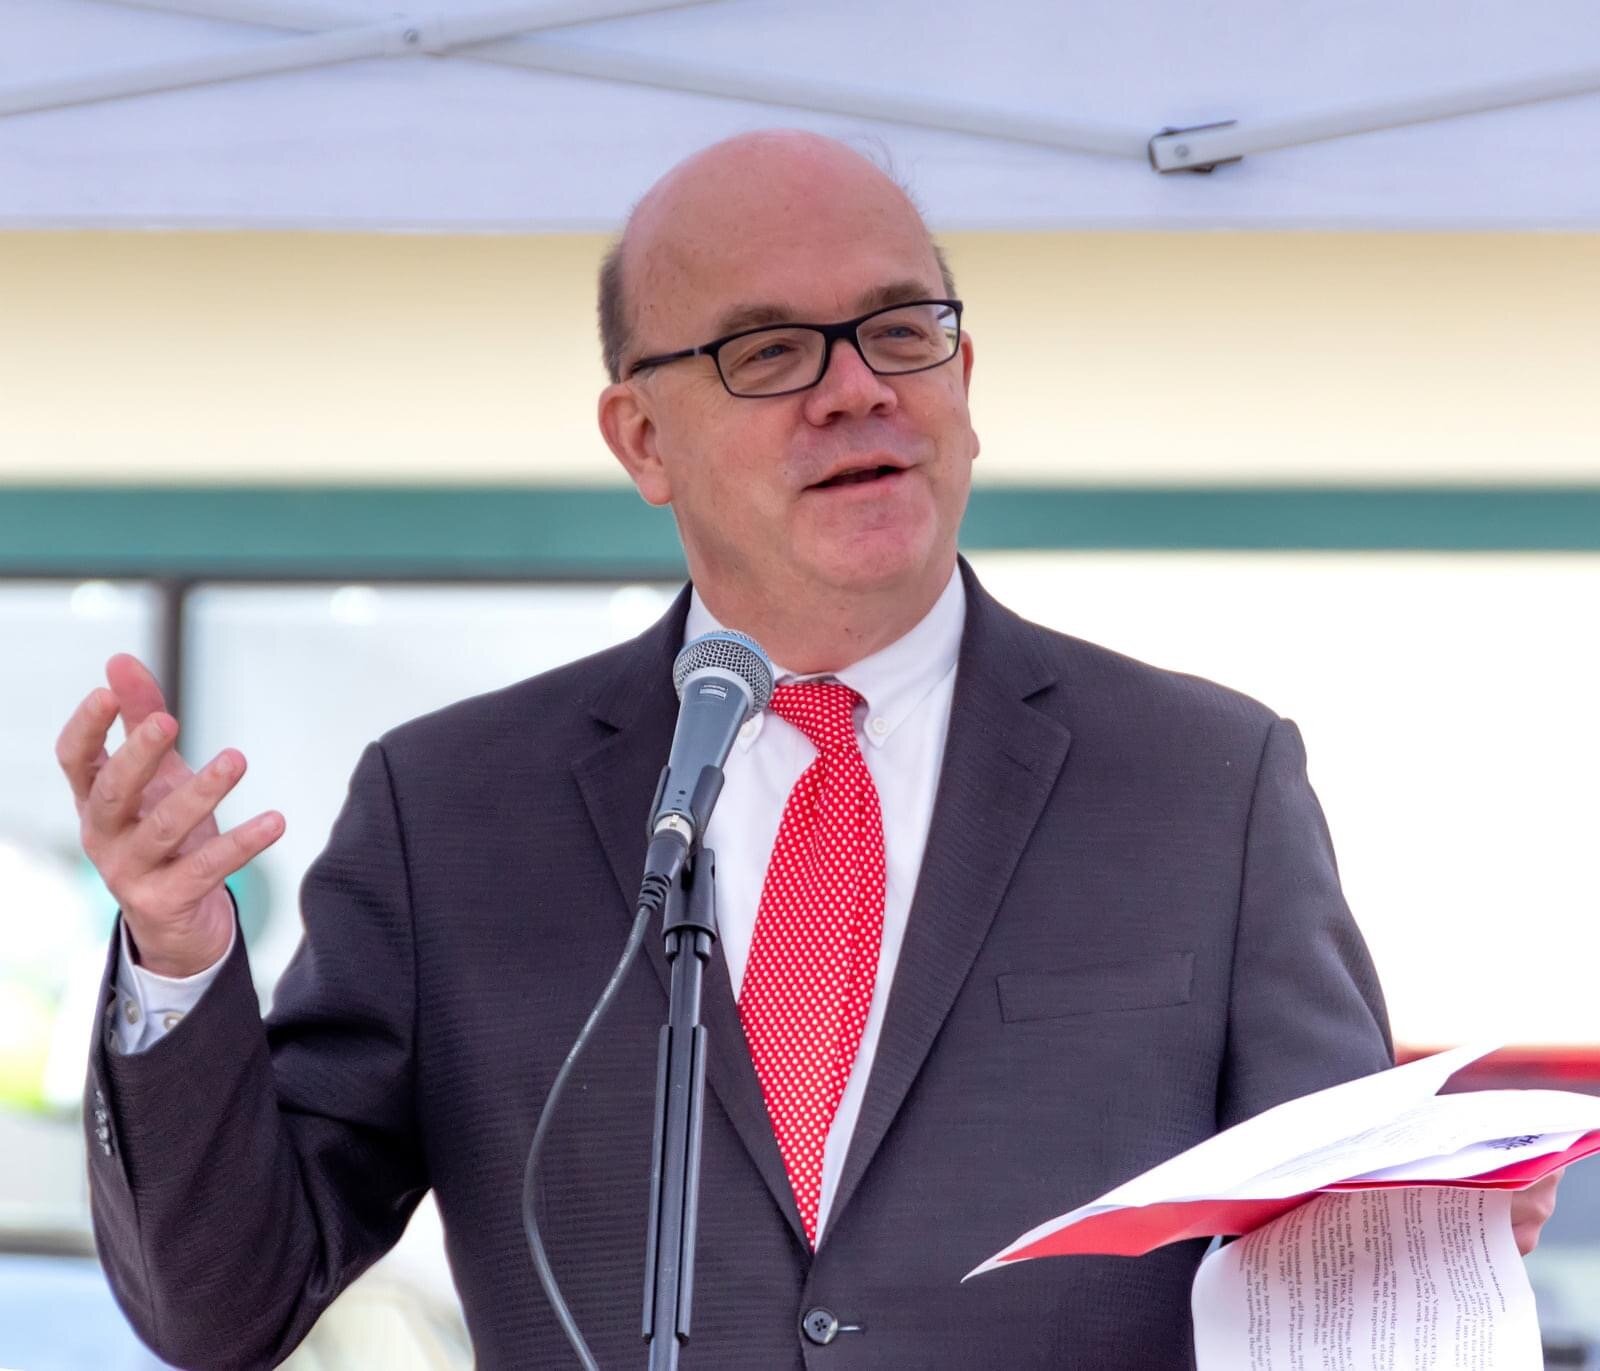 Congressman Jim McGovern speaking at Grand Opening Ceremony (photo credit to Mitchell Grosy)